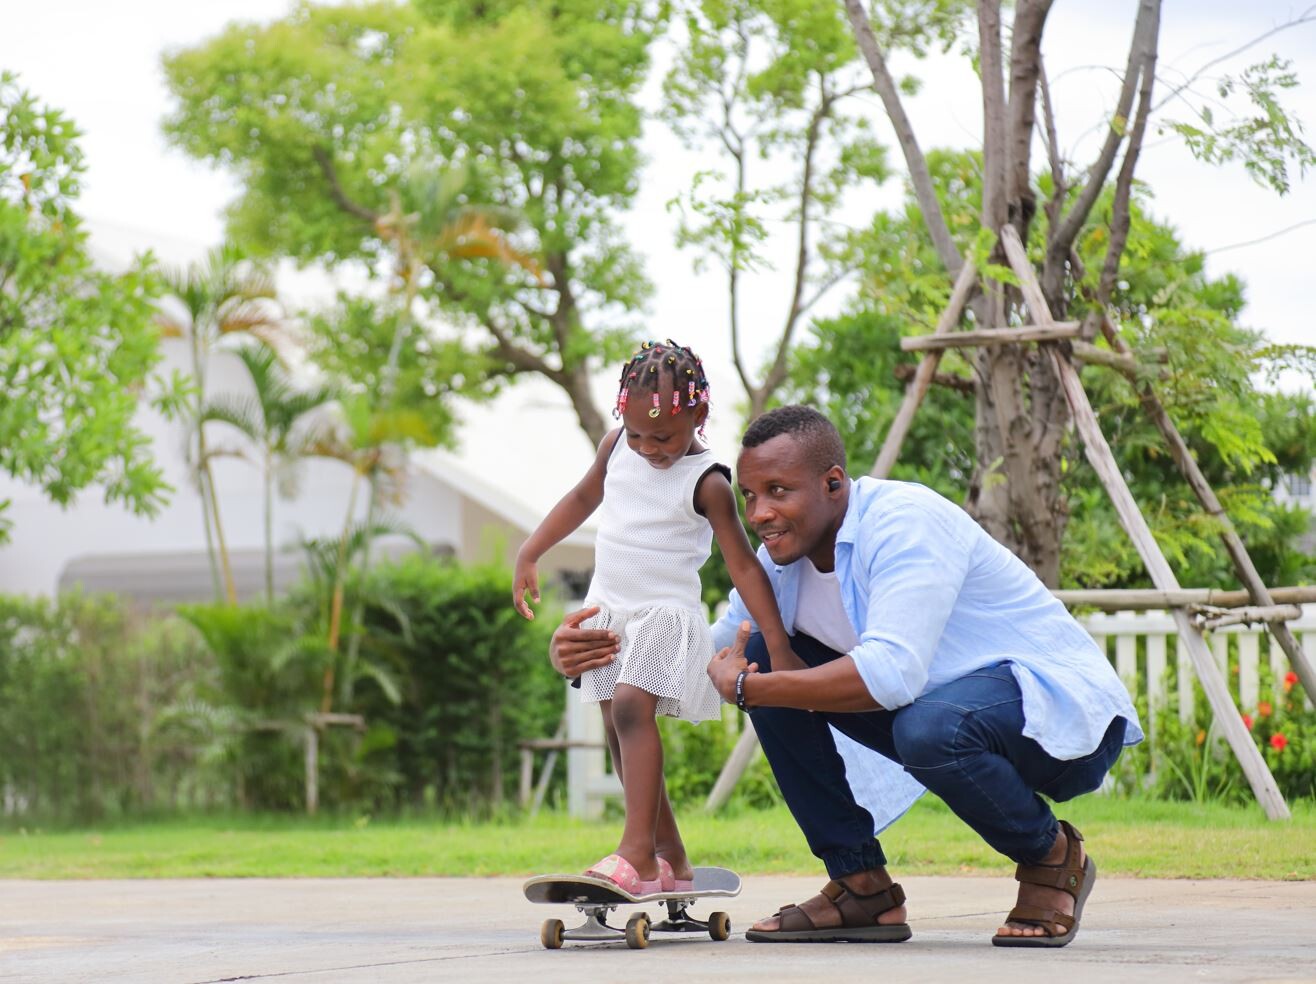 Father with young child on skateboard